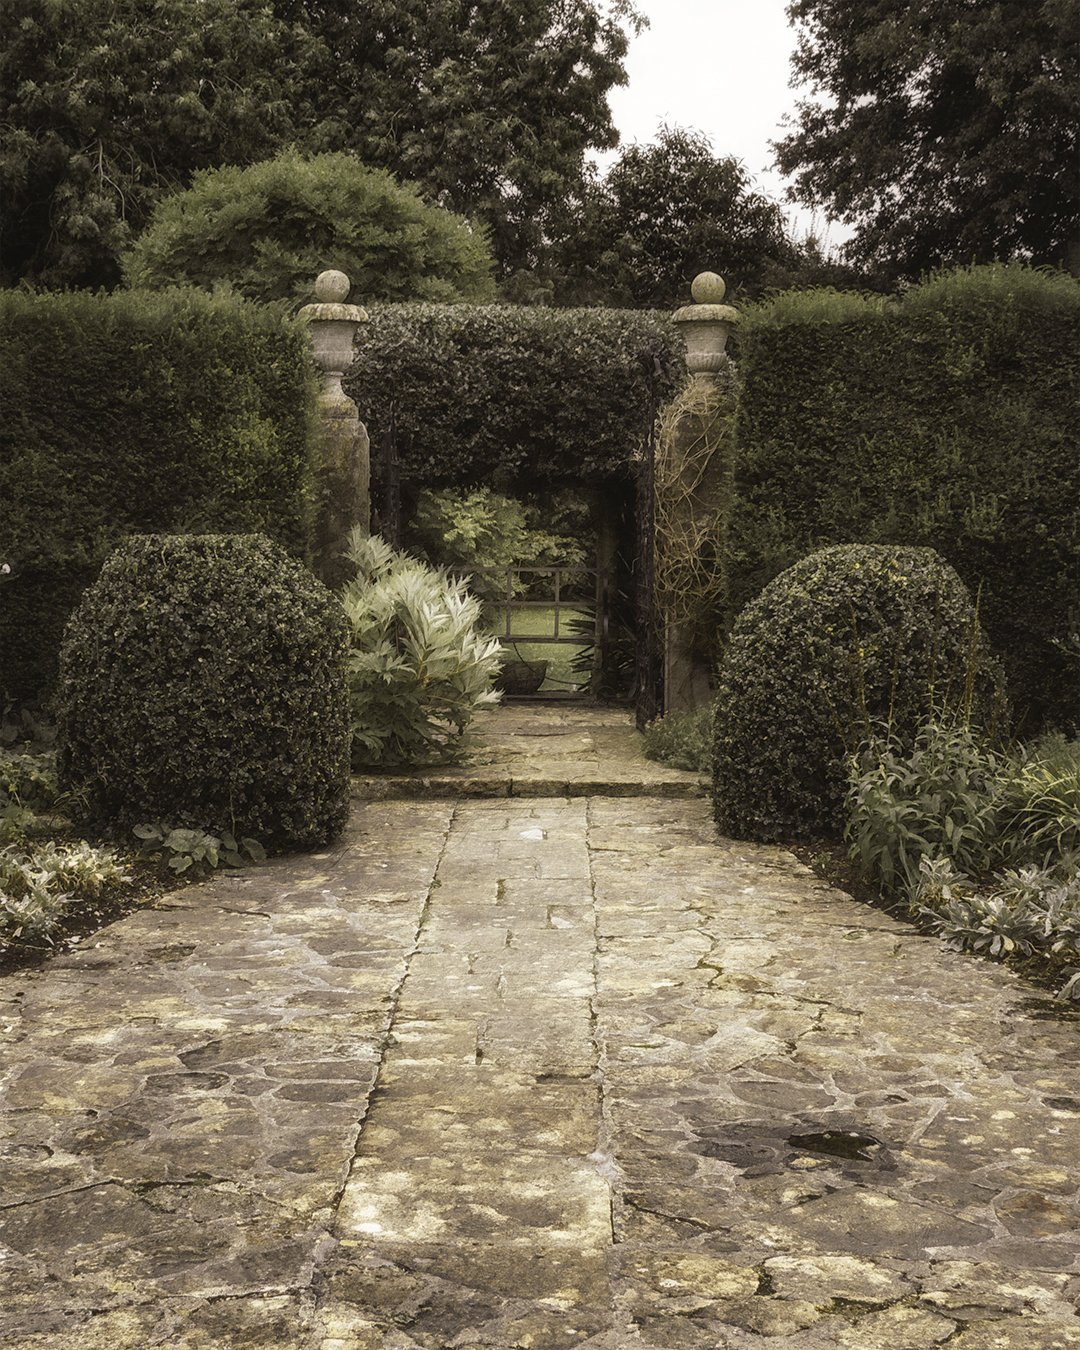 ~
.
.
Entry
.
.
#gardens #thecourtsnt